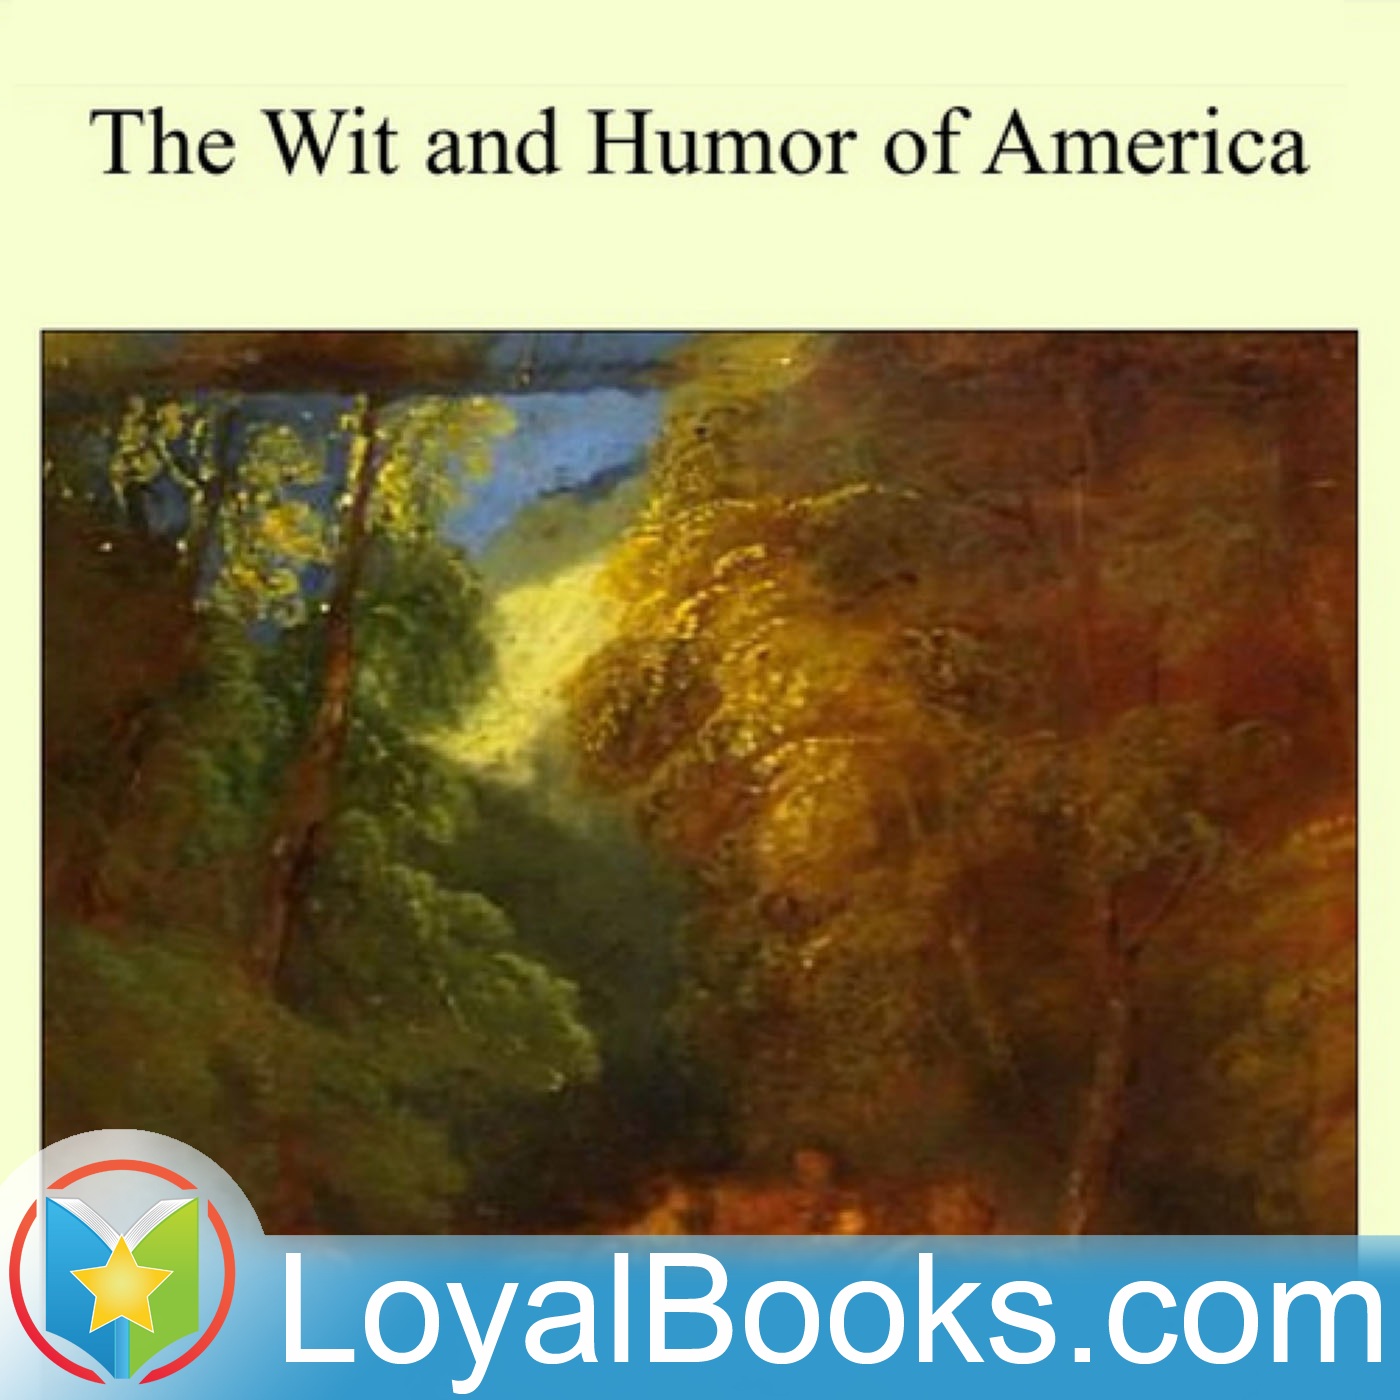 The Wit and Humor of America by Marshall Pinckney Wilder